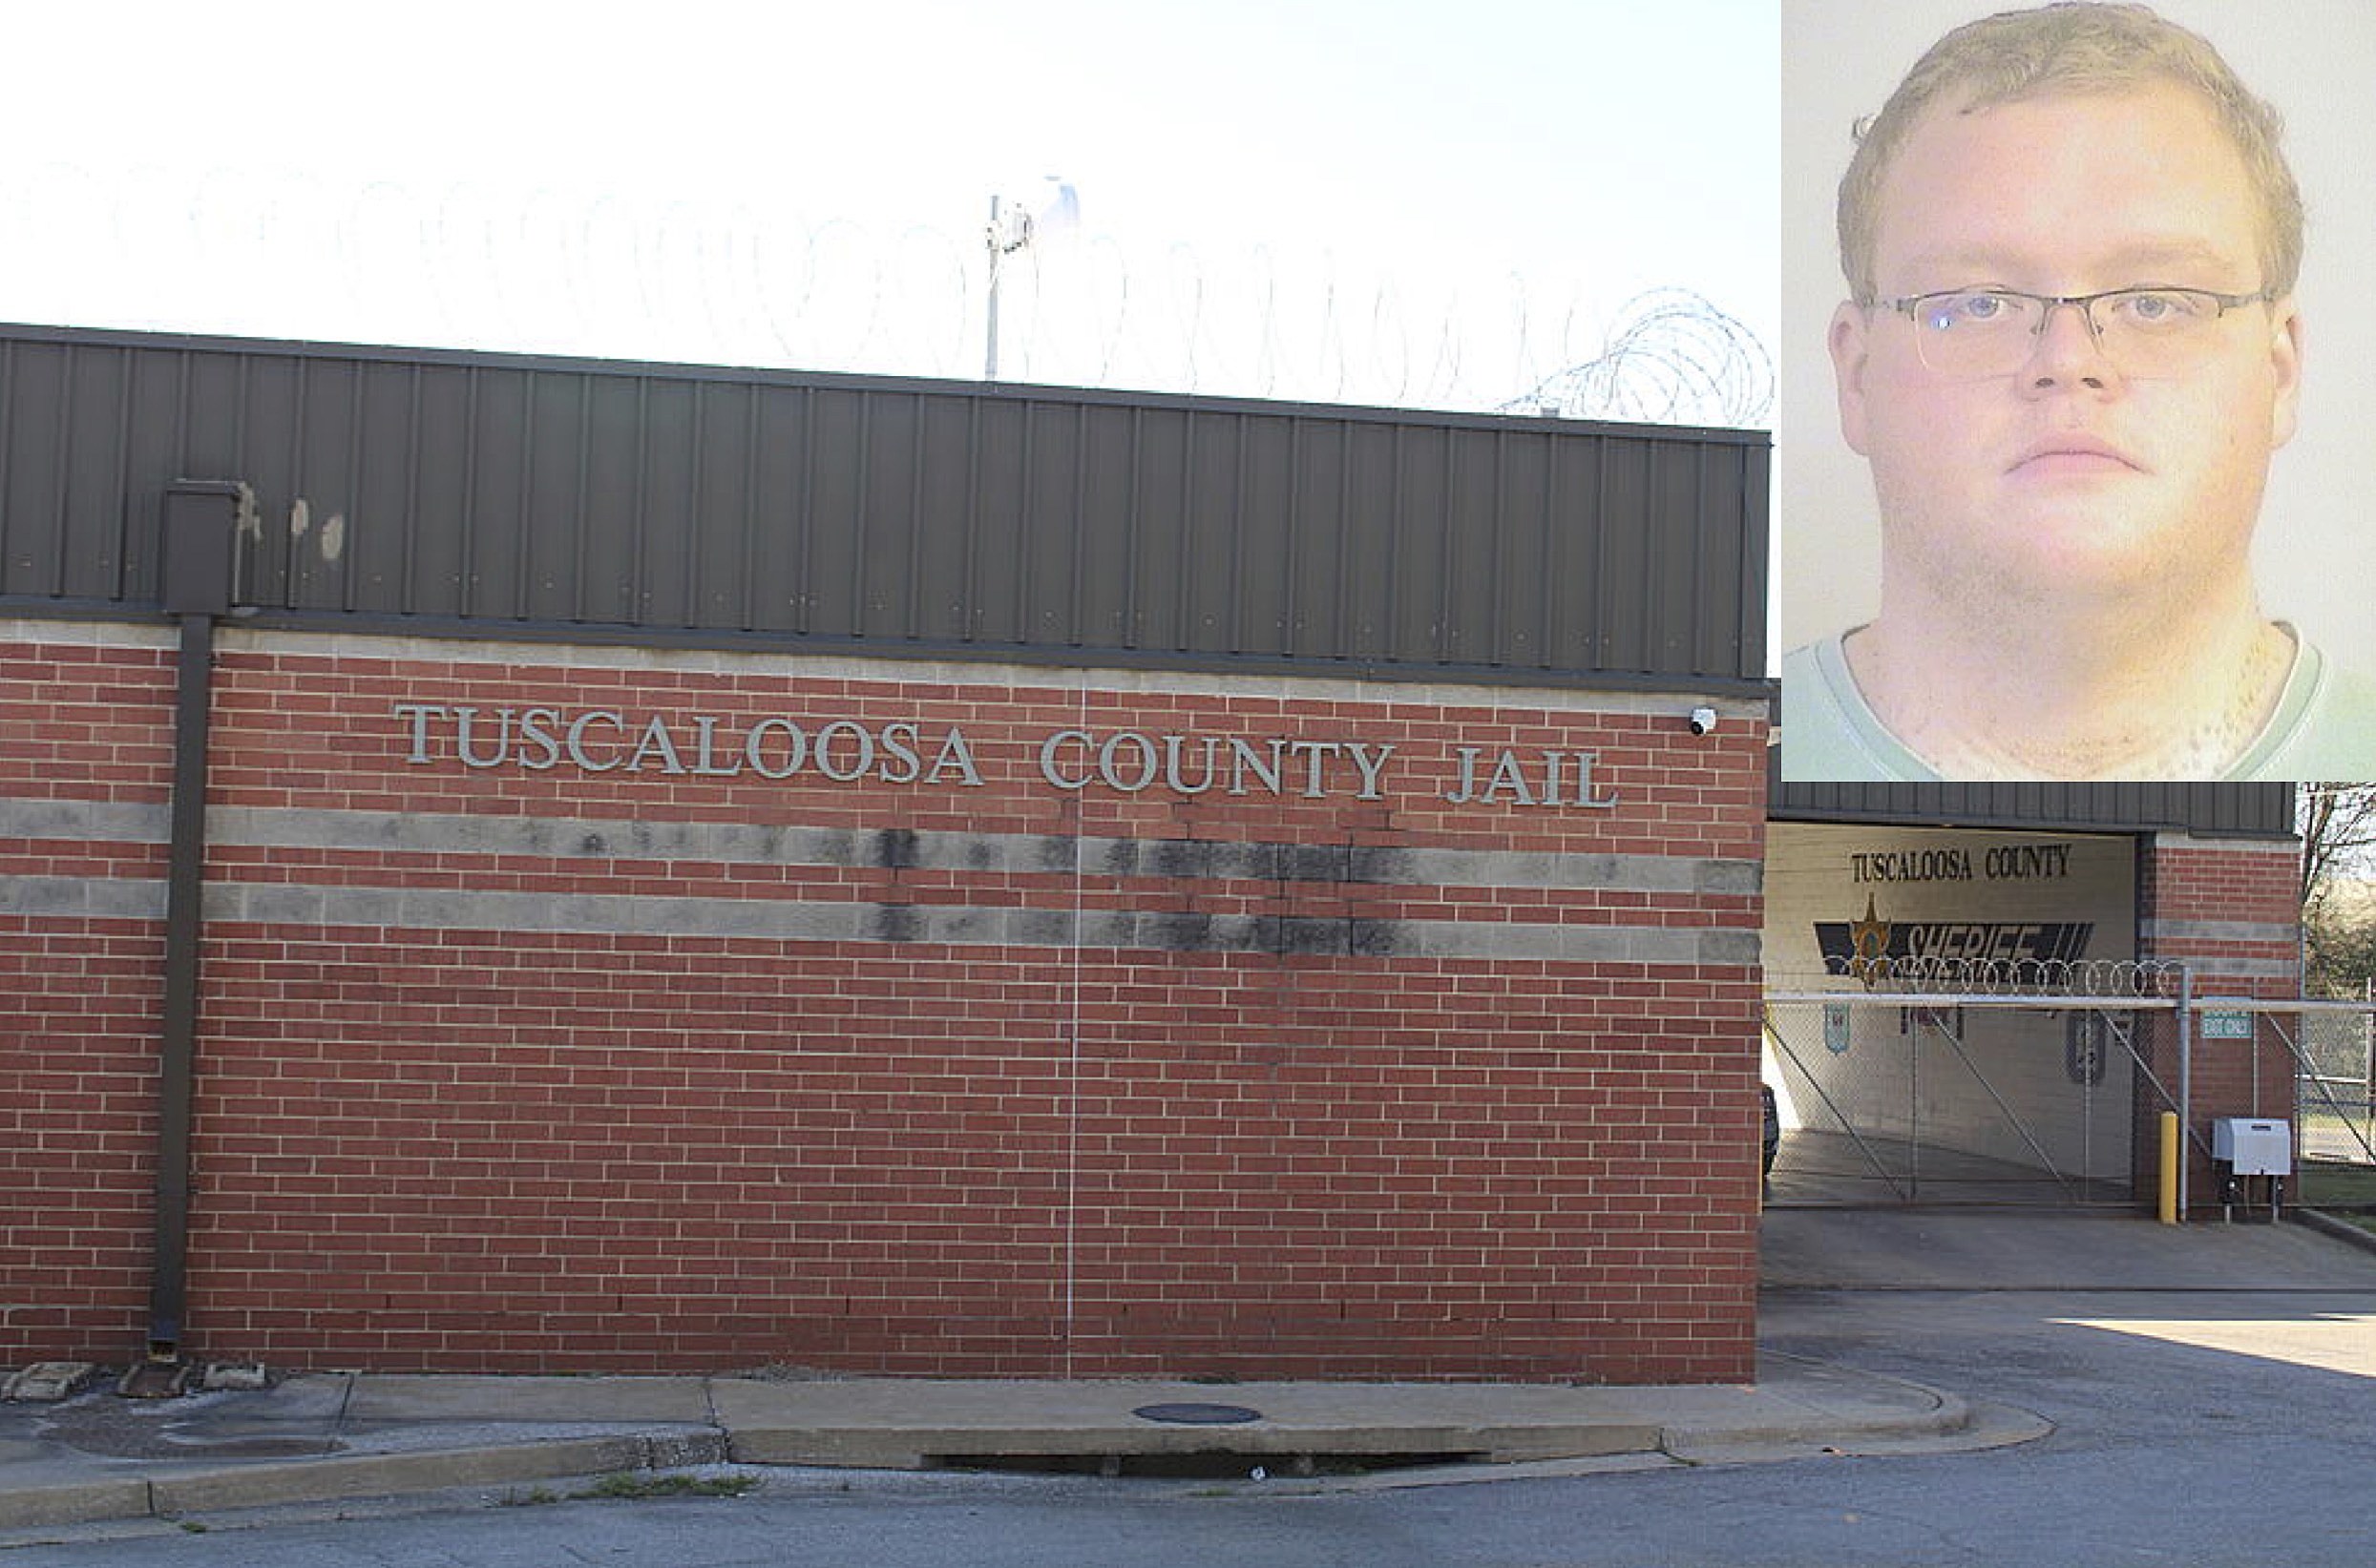 Ghetto School Porn - Tuscaloosa Man Arrested on 10 Counts of Child Porn Possession